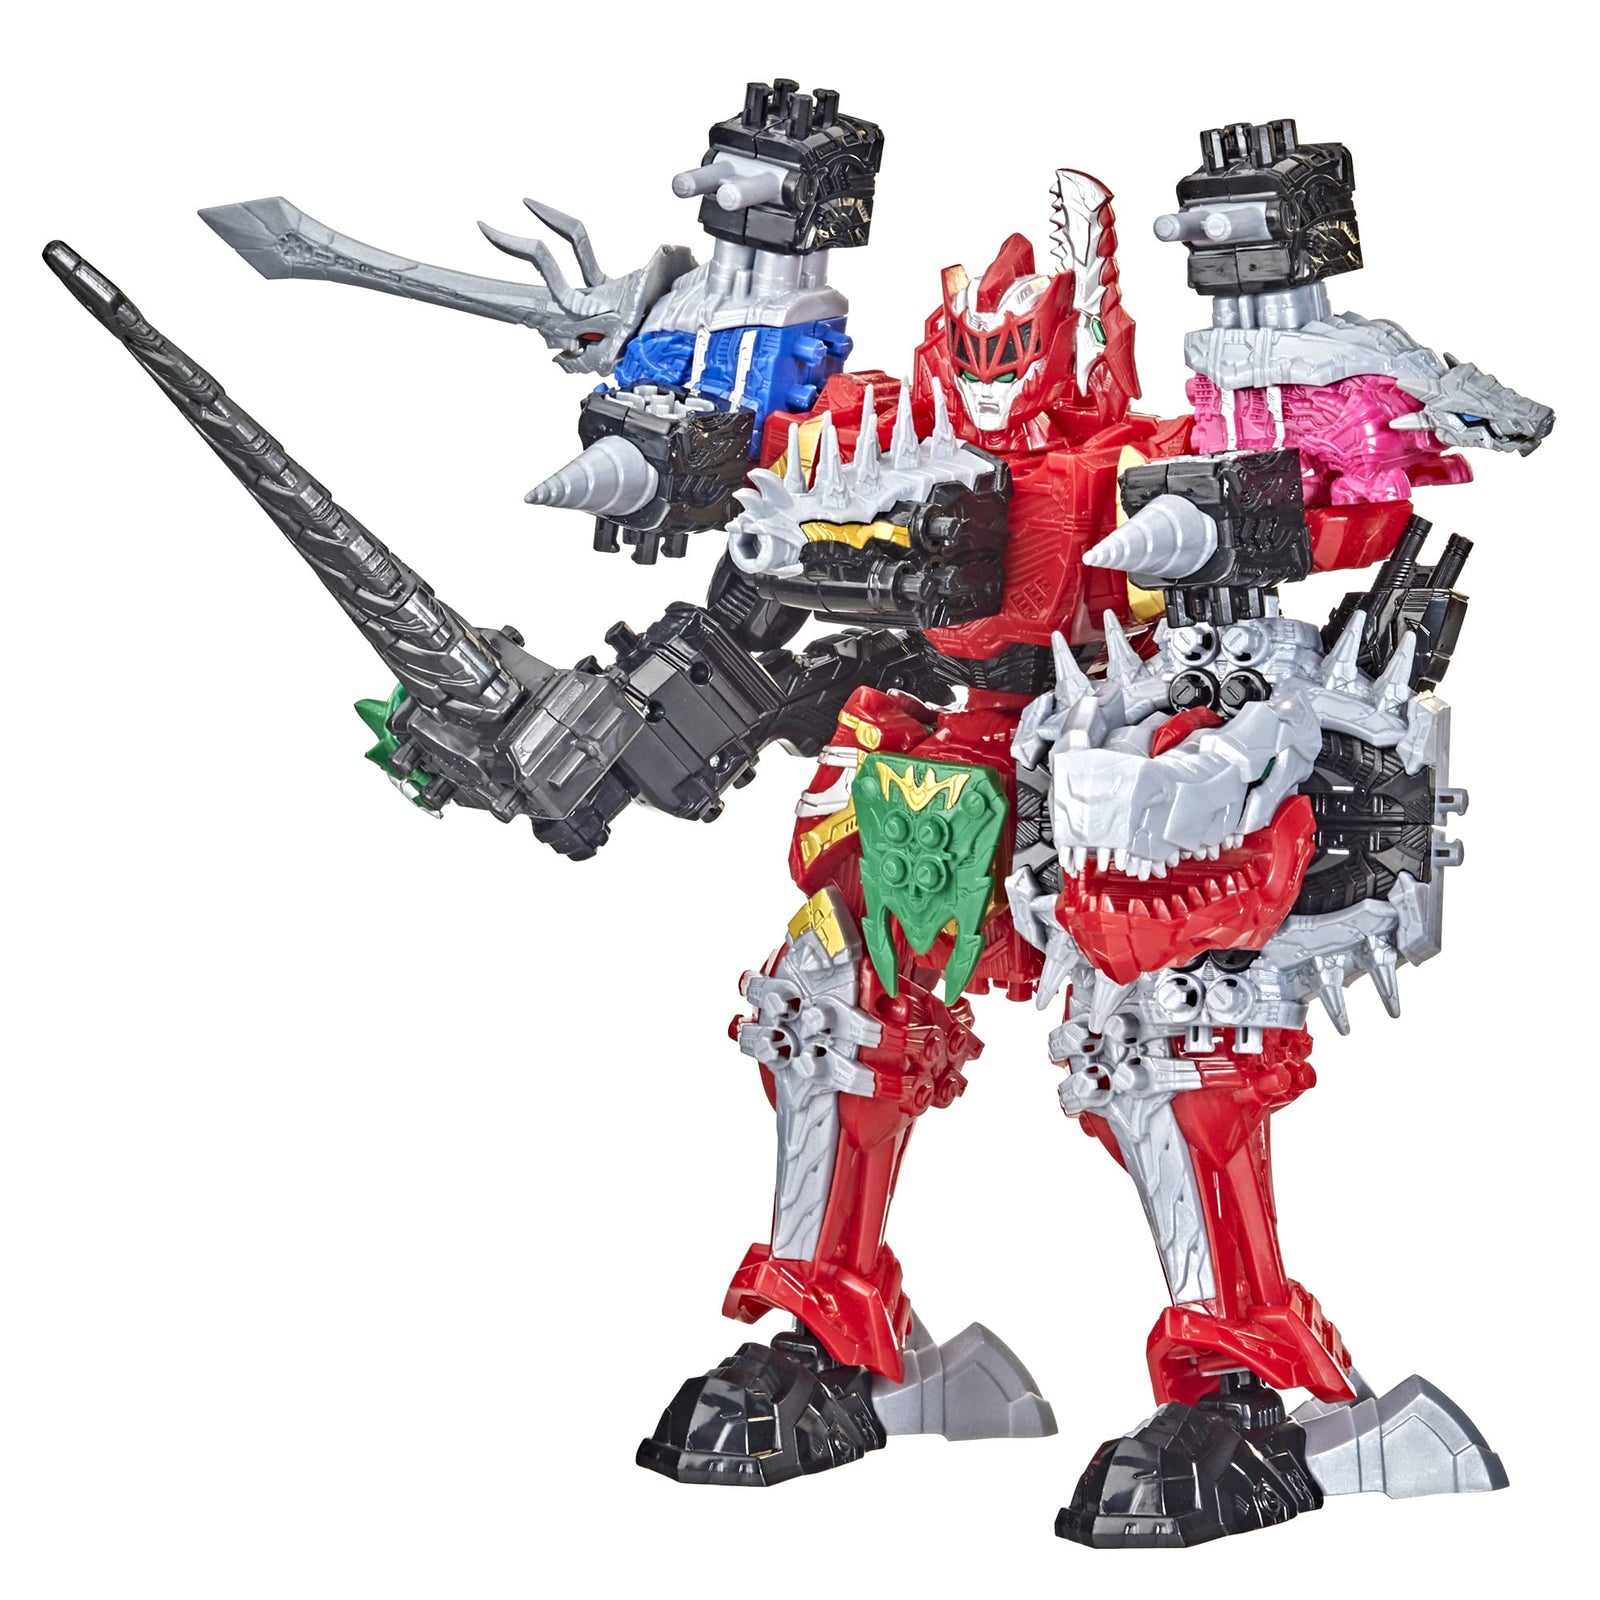 Power Rangers Dino Fury Megazord Mega Pack 5-Pack Zord Action Figure Toys for Kids Ages 4 and Up Zord Link Mix-and-Match Custom Build System (Amazon Exclusive)